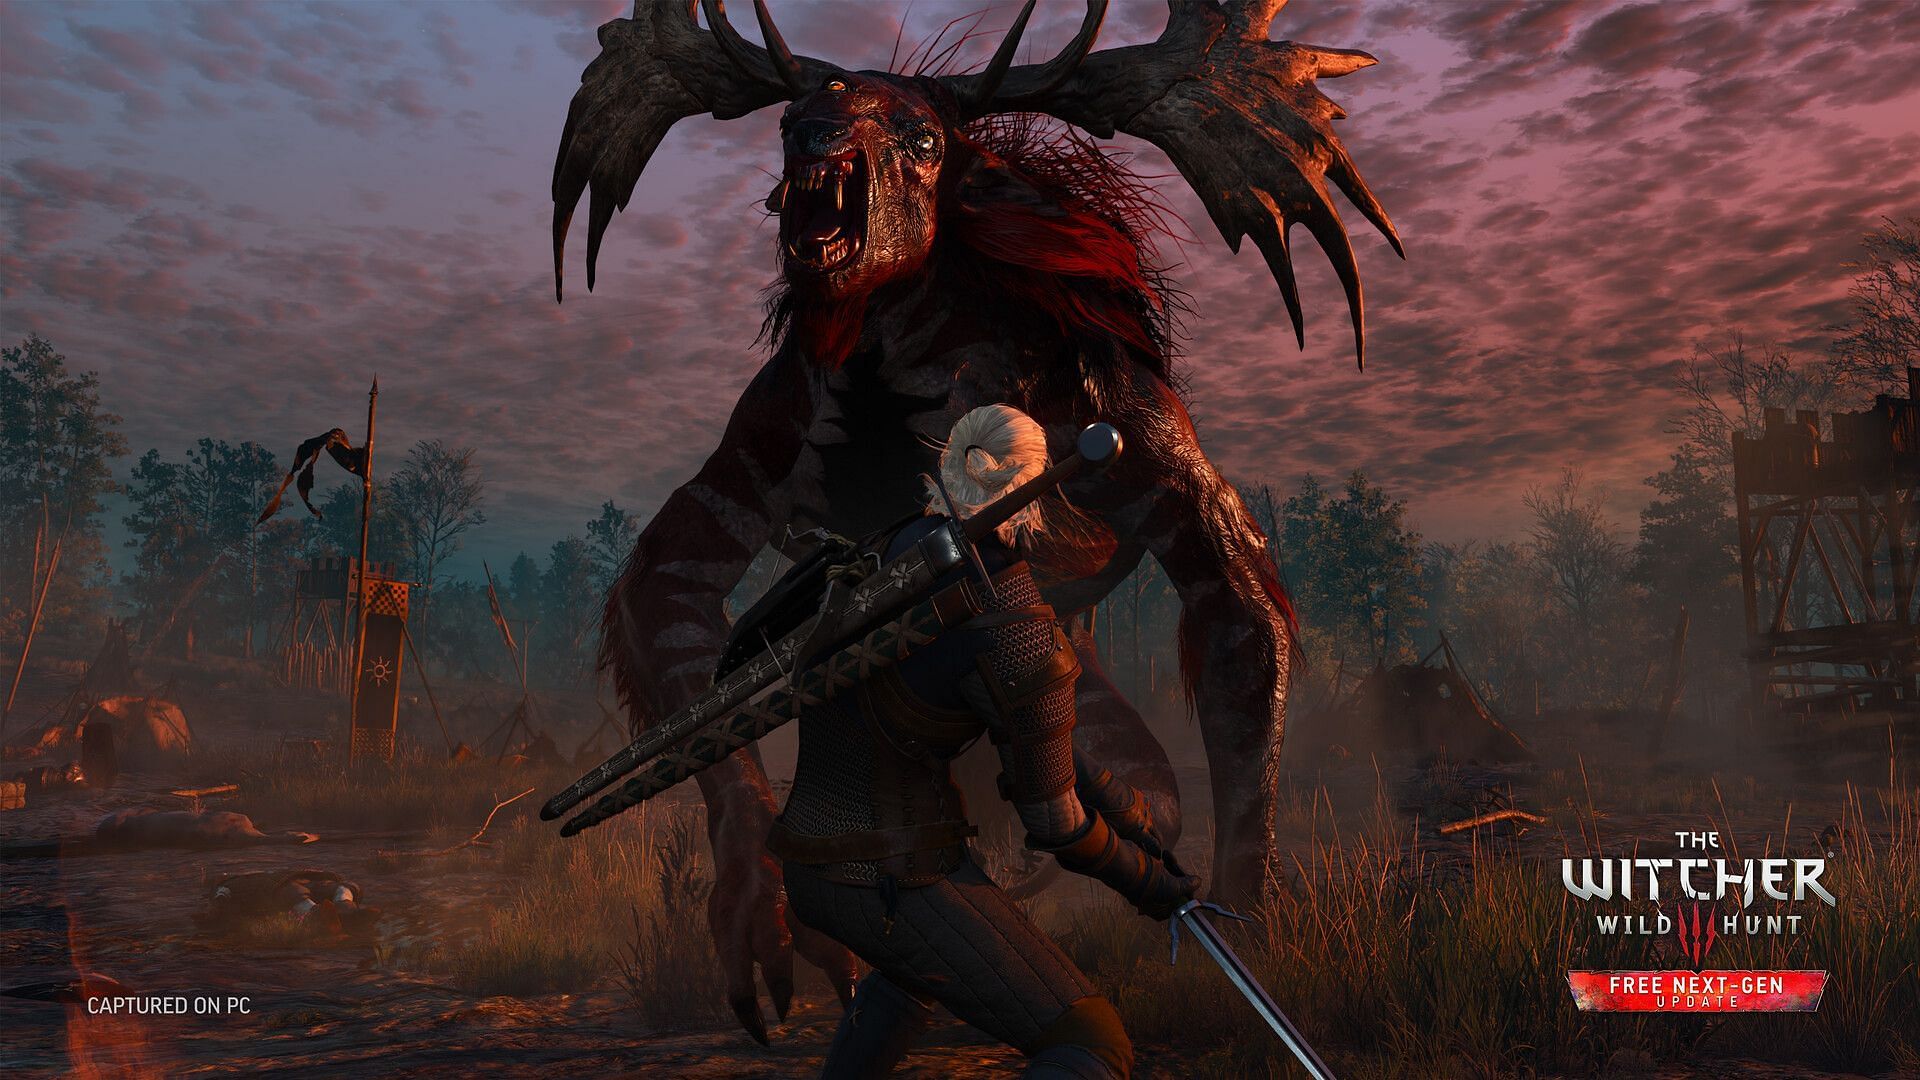 Best armor sets in The Witcher 3, ranked.